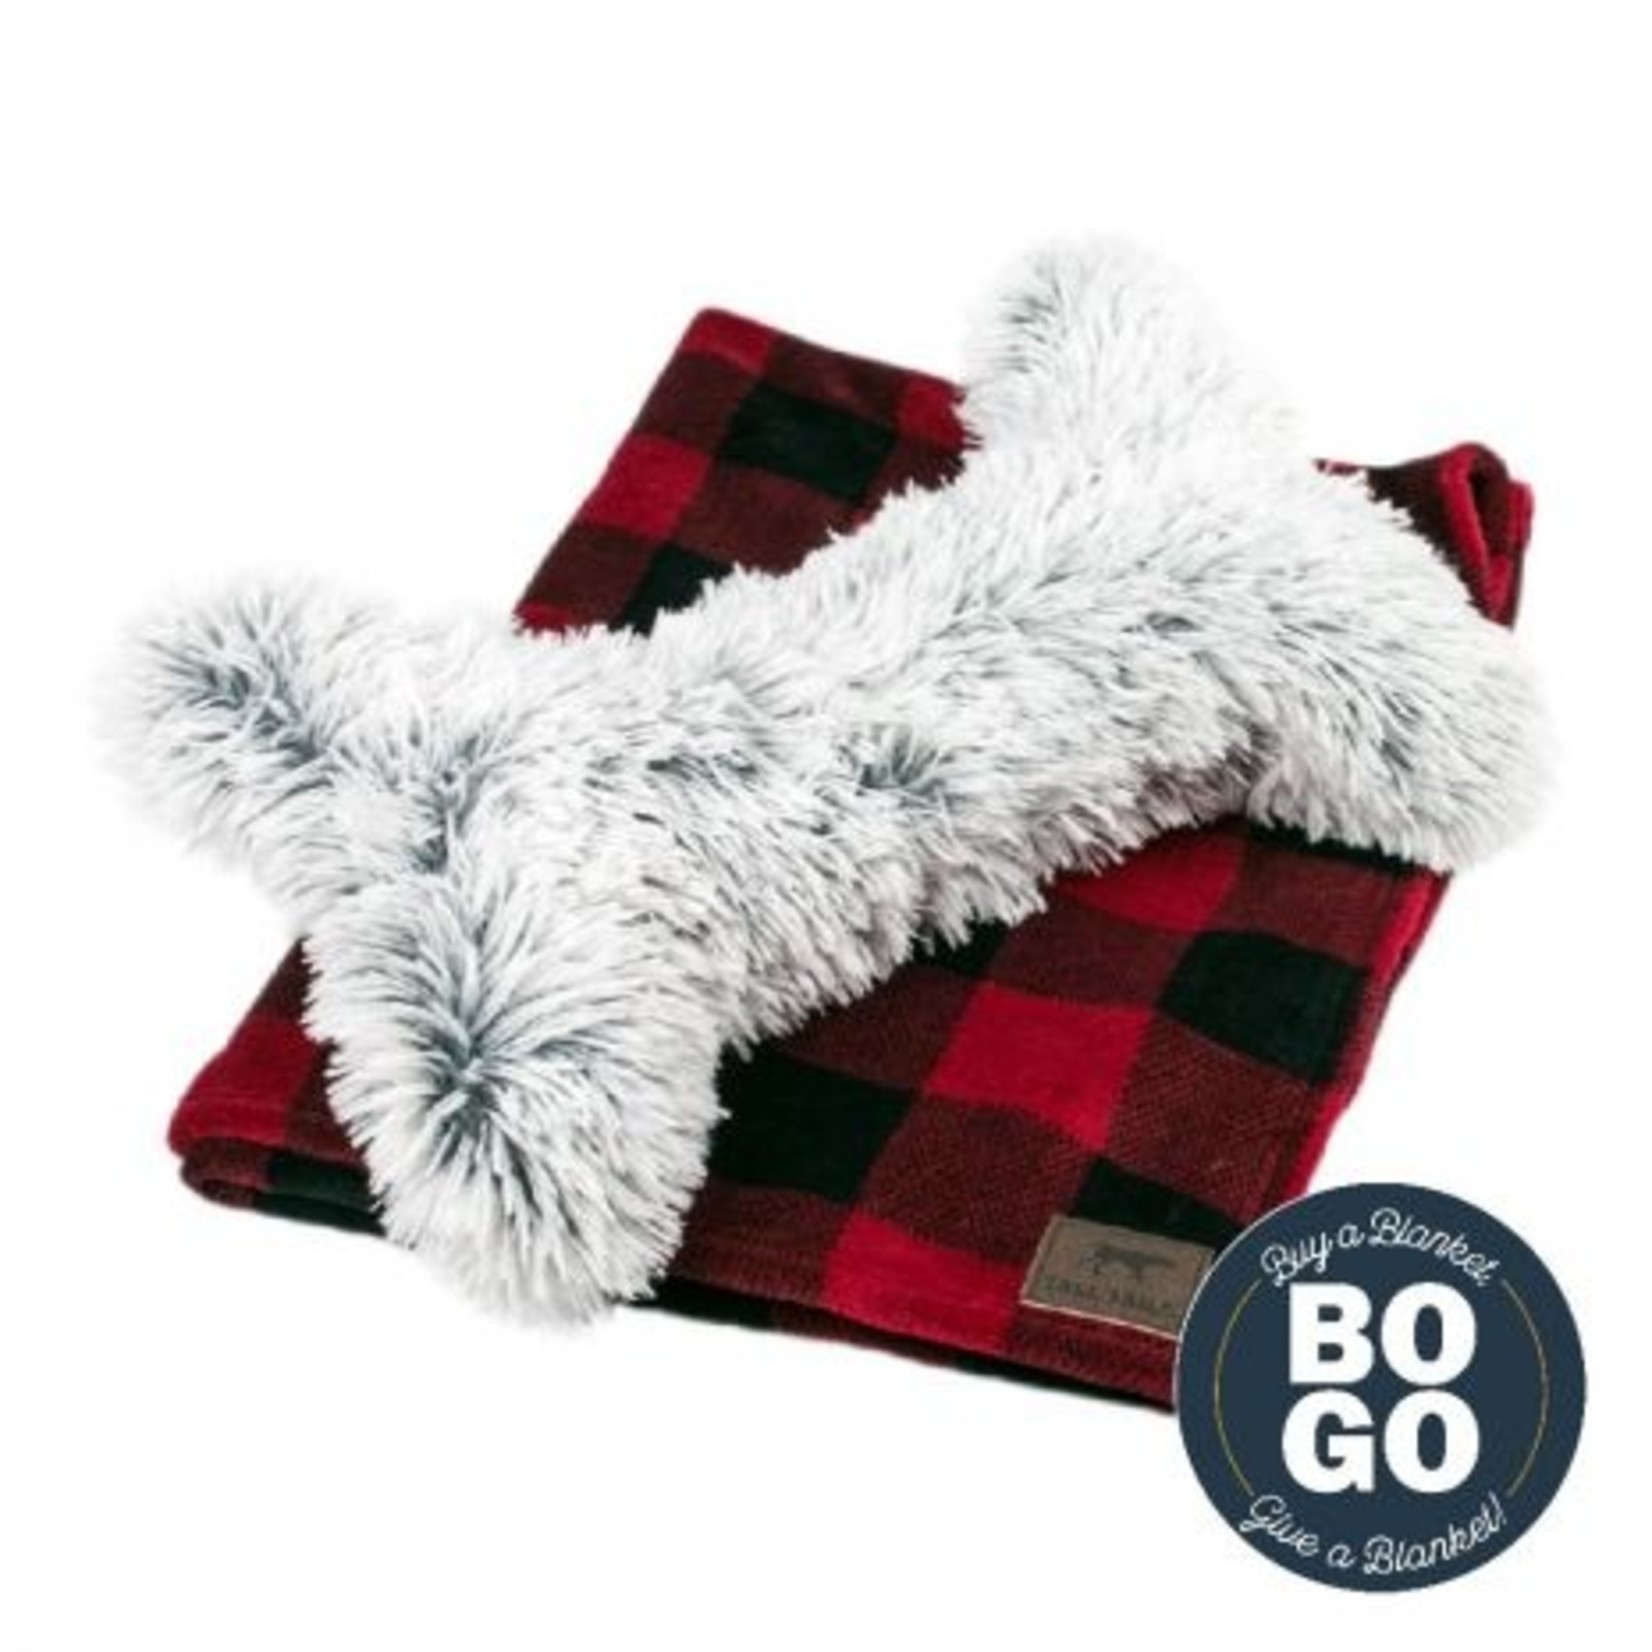 Tall Tails Tall Tails Oversized Bone & Blanket Gift Set